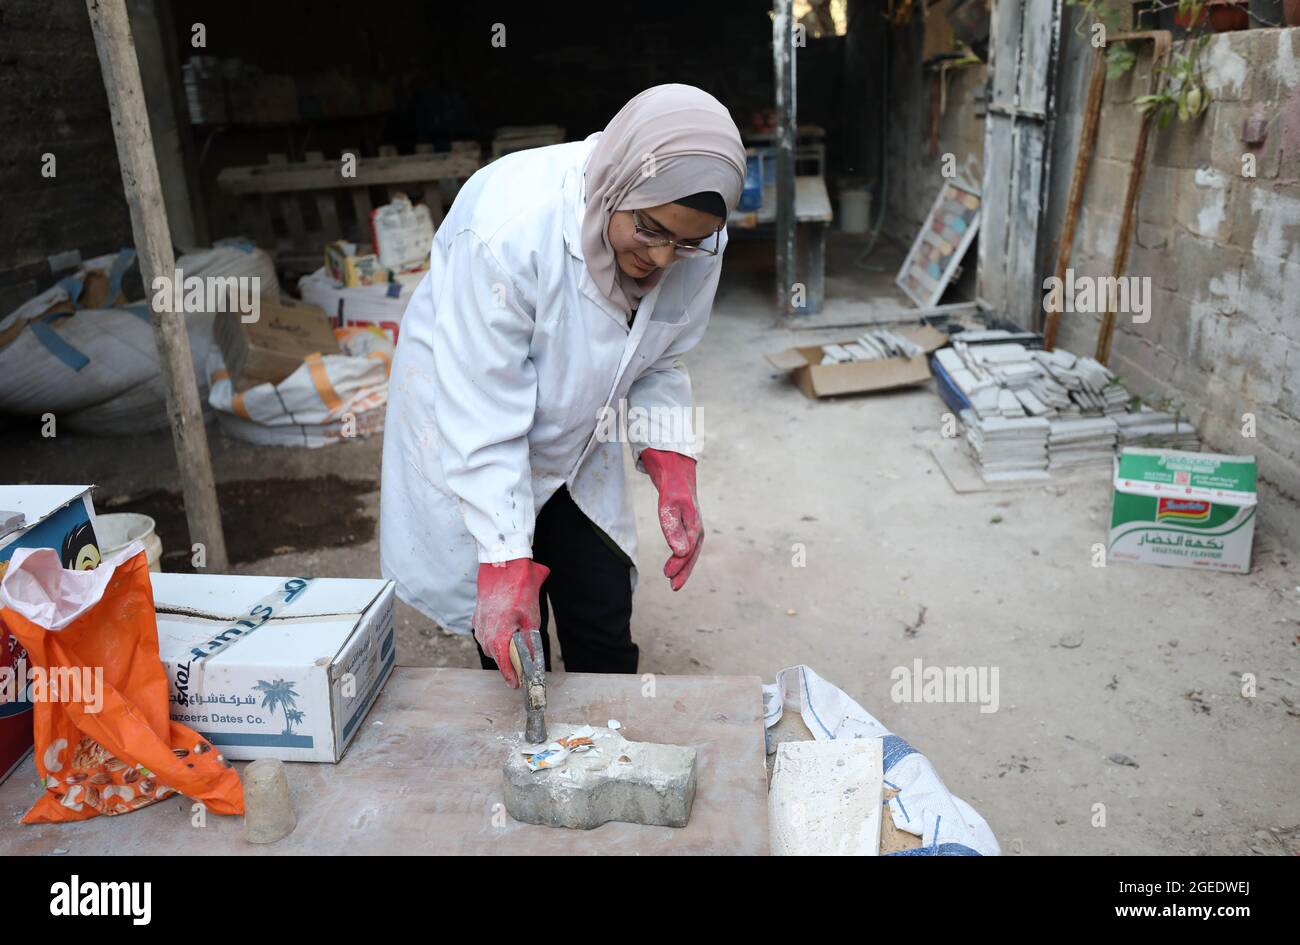 Tulkarem. 12th Aug, 2021. Rawan Rajab works on turning the waste of glass into eco-friendly building stones at her workshop in the West Bank City of Tulkarem, Aug. 12, 2021. TO GO WITH "Feature: Young Palestinian woman turns glass waste into eco-friendly building stones" Credit: Ayman Nobani/Xinhua/Alamy Live News Stock Photo